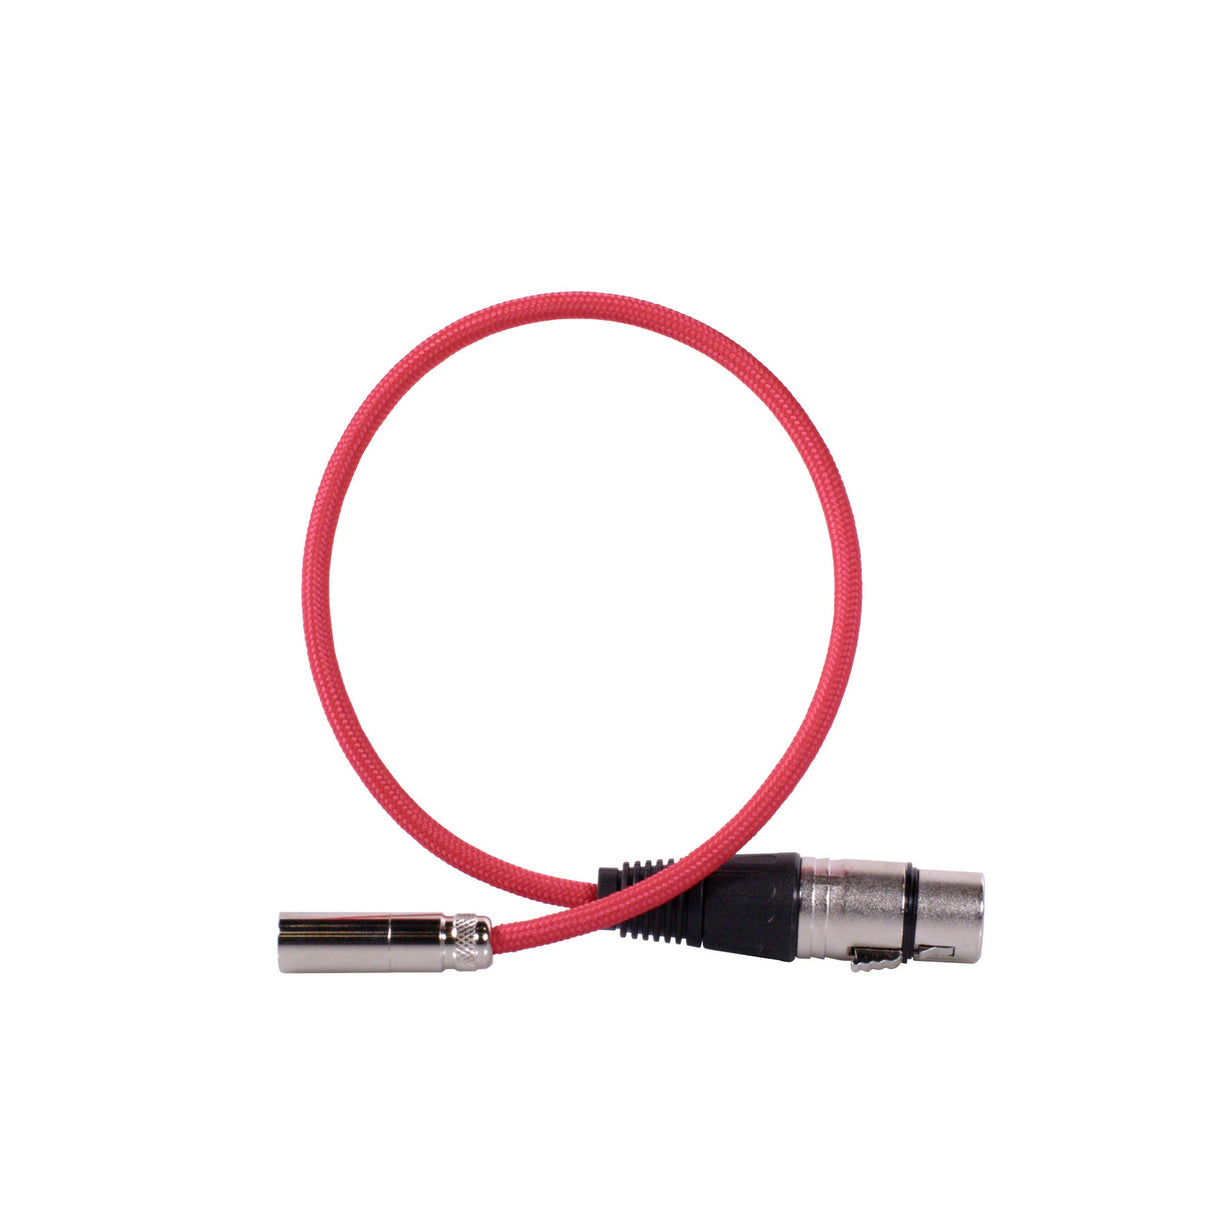 1SV Mini XLR Male to XLR Female Cable, 16-Inches, Red